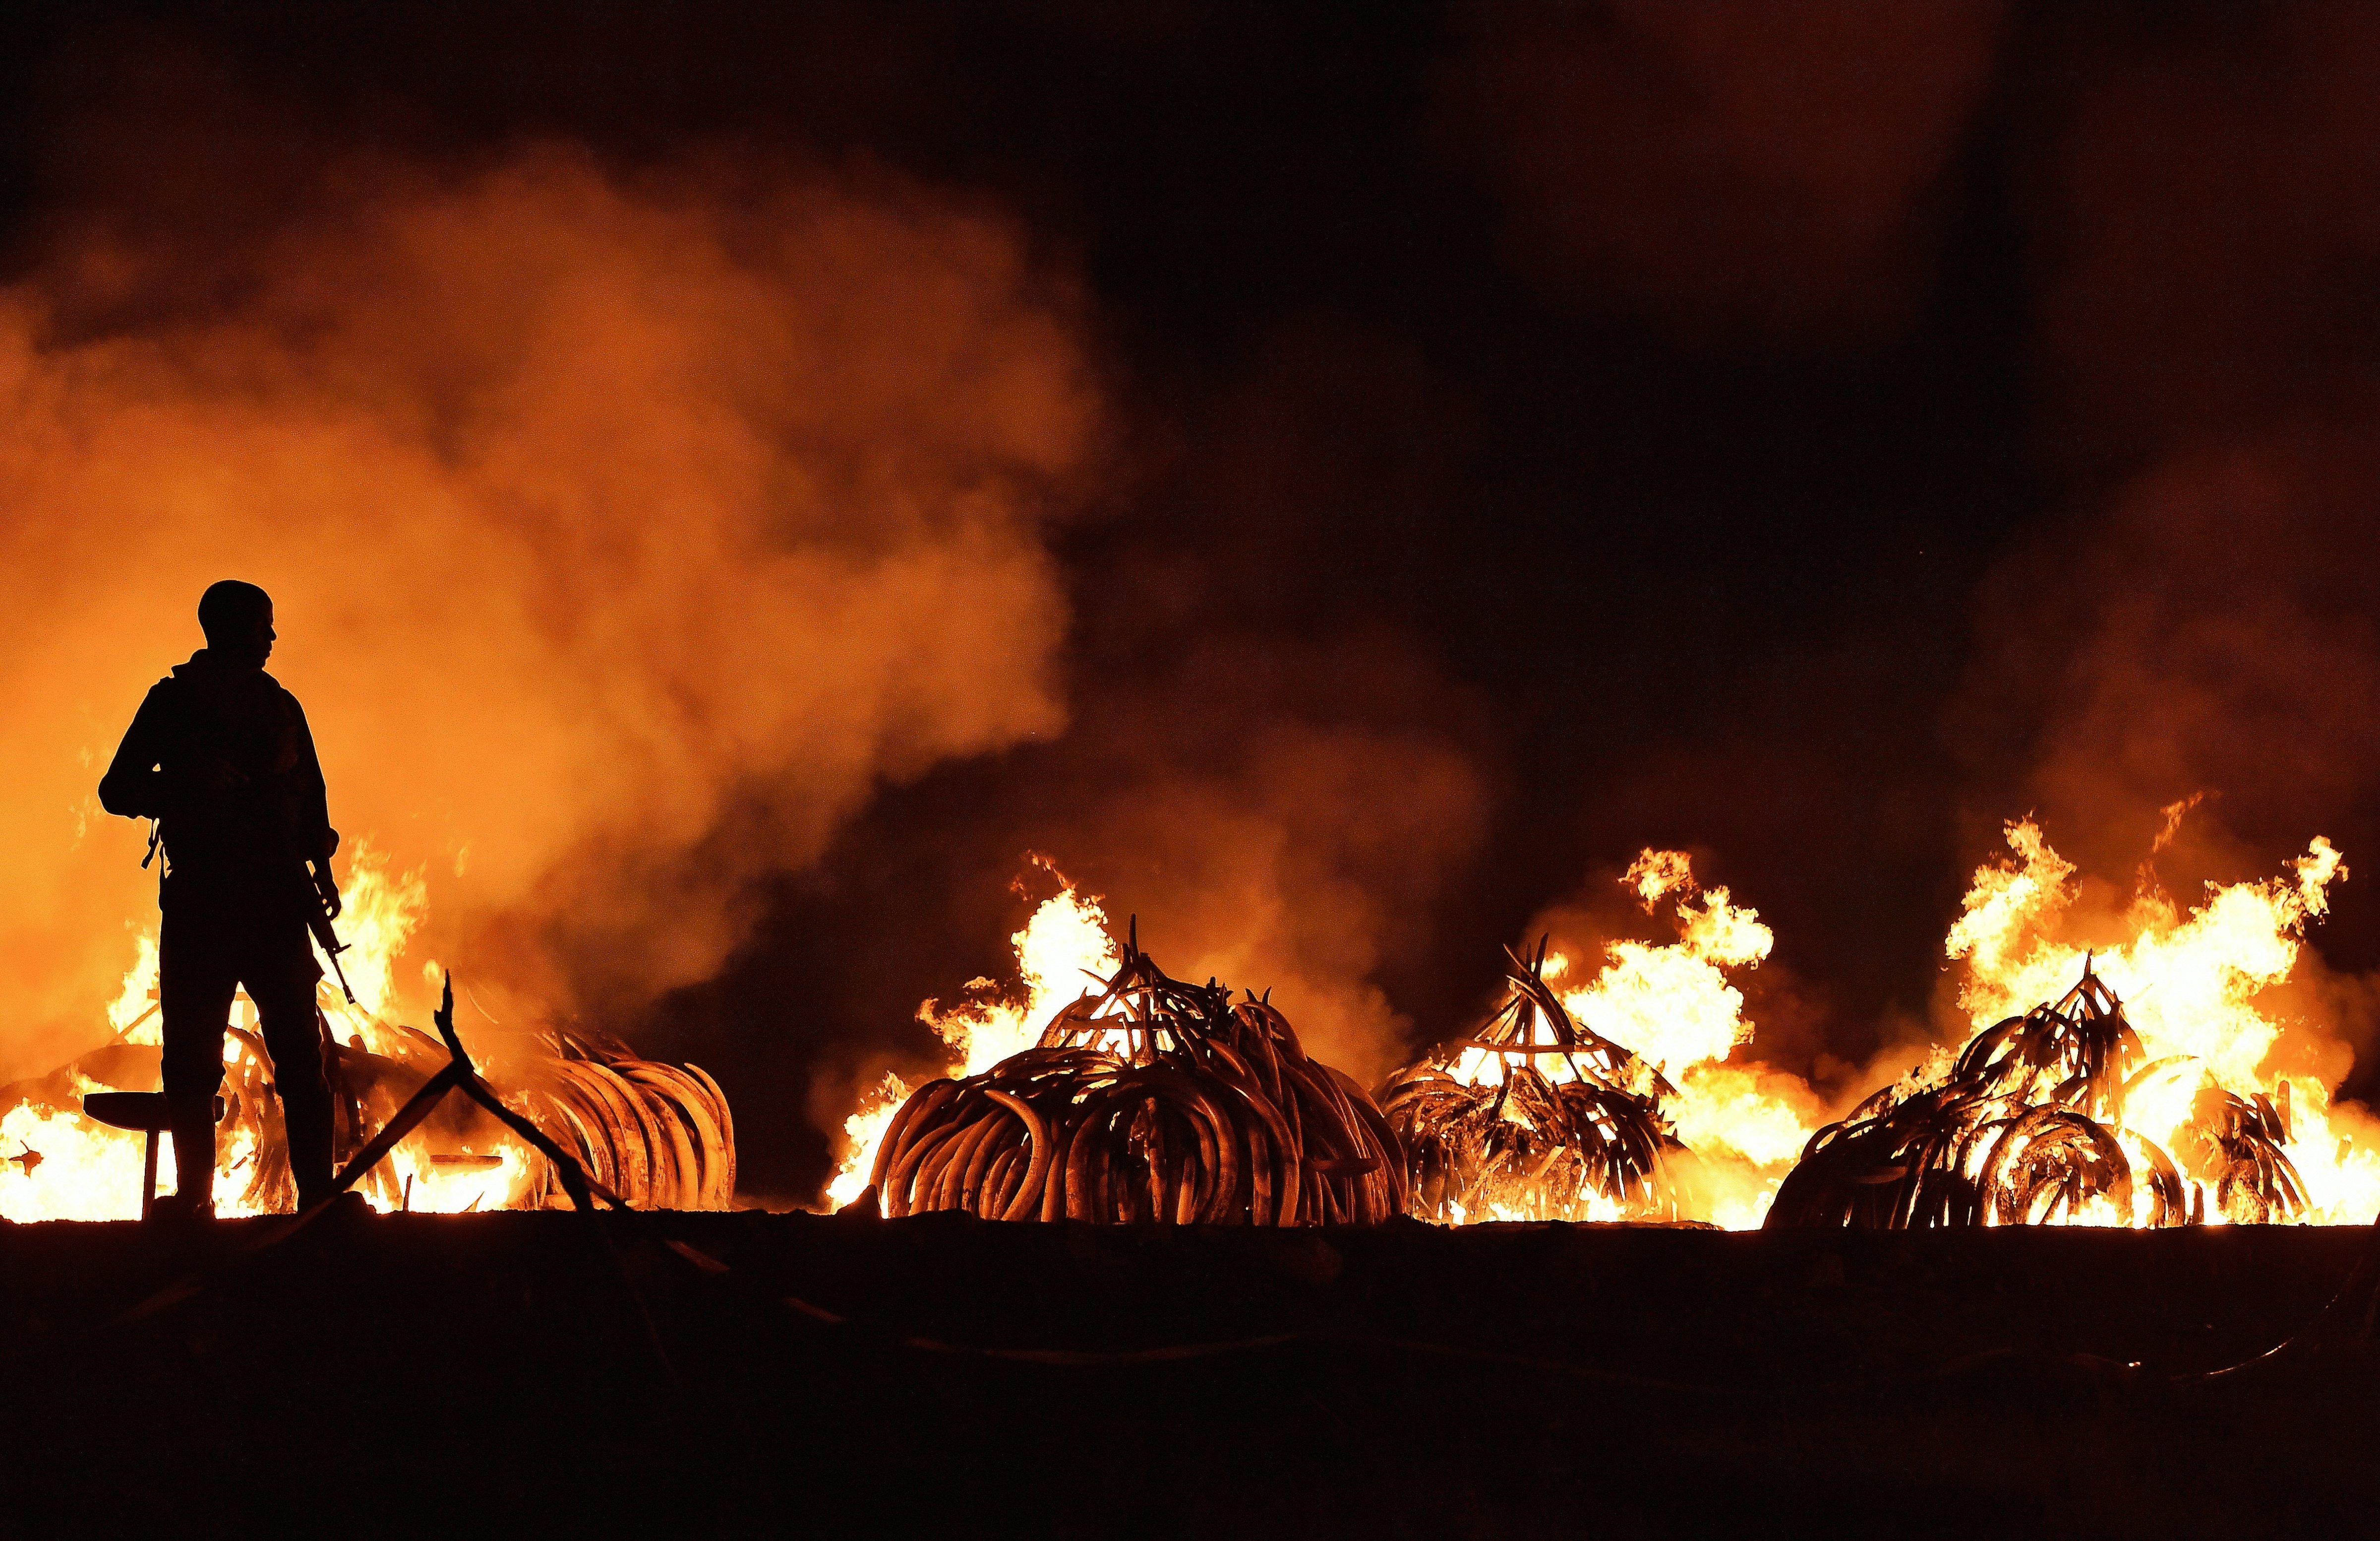 A Kenya Wildlife Services ranger stands guard in front illegal stockpiles of burning elephant tusks at the Nairobi National Park on April 30, 2016 (Carl De Souza—AFP/Getty Images)